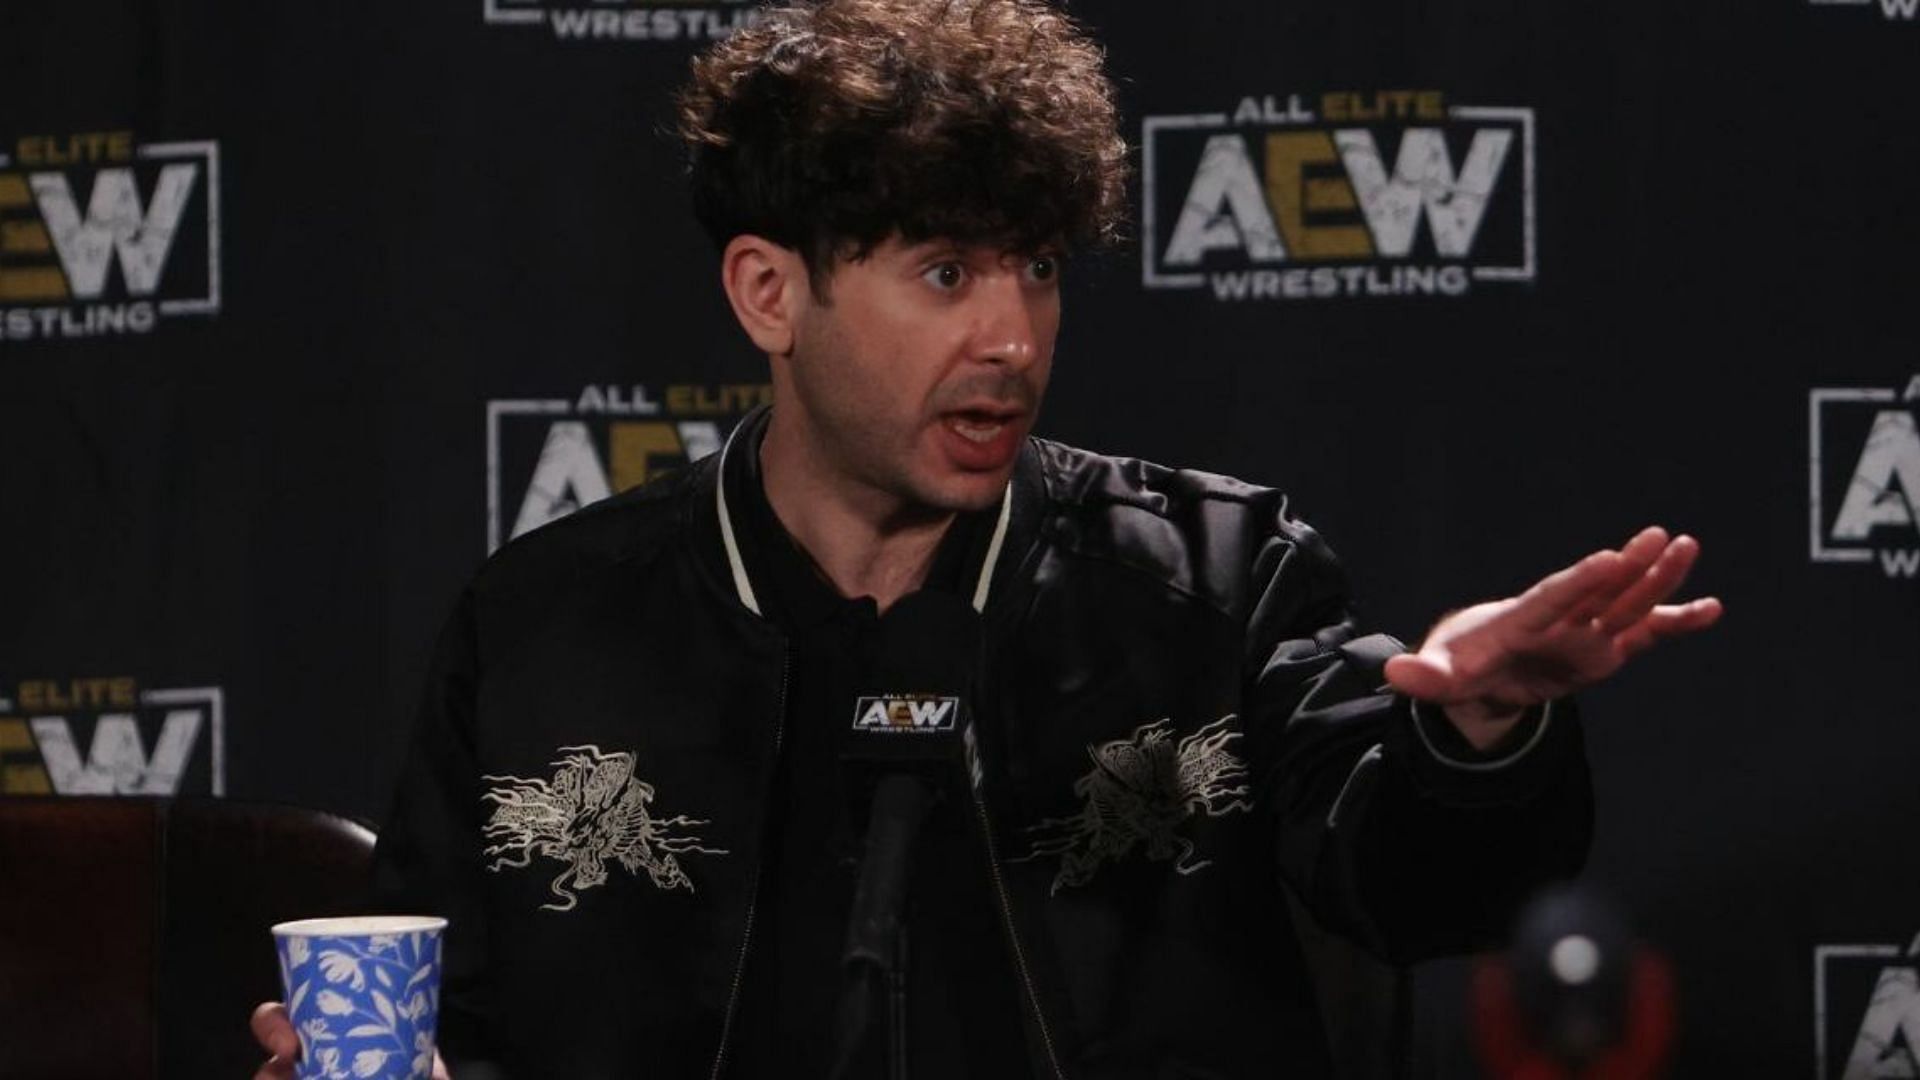 Does Tony Khan have a good explanation for the AEW All In controversy?